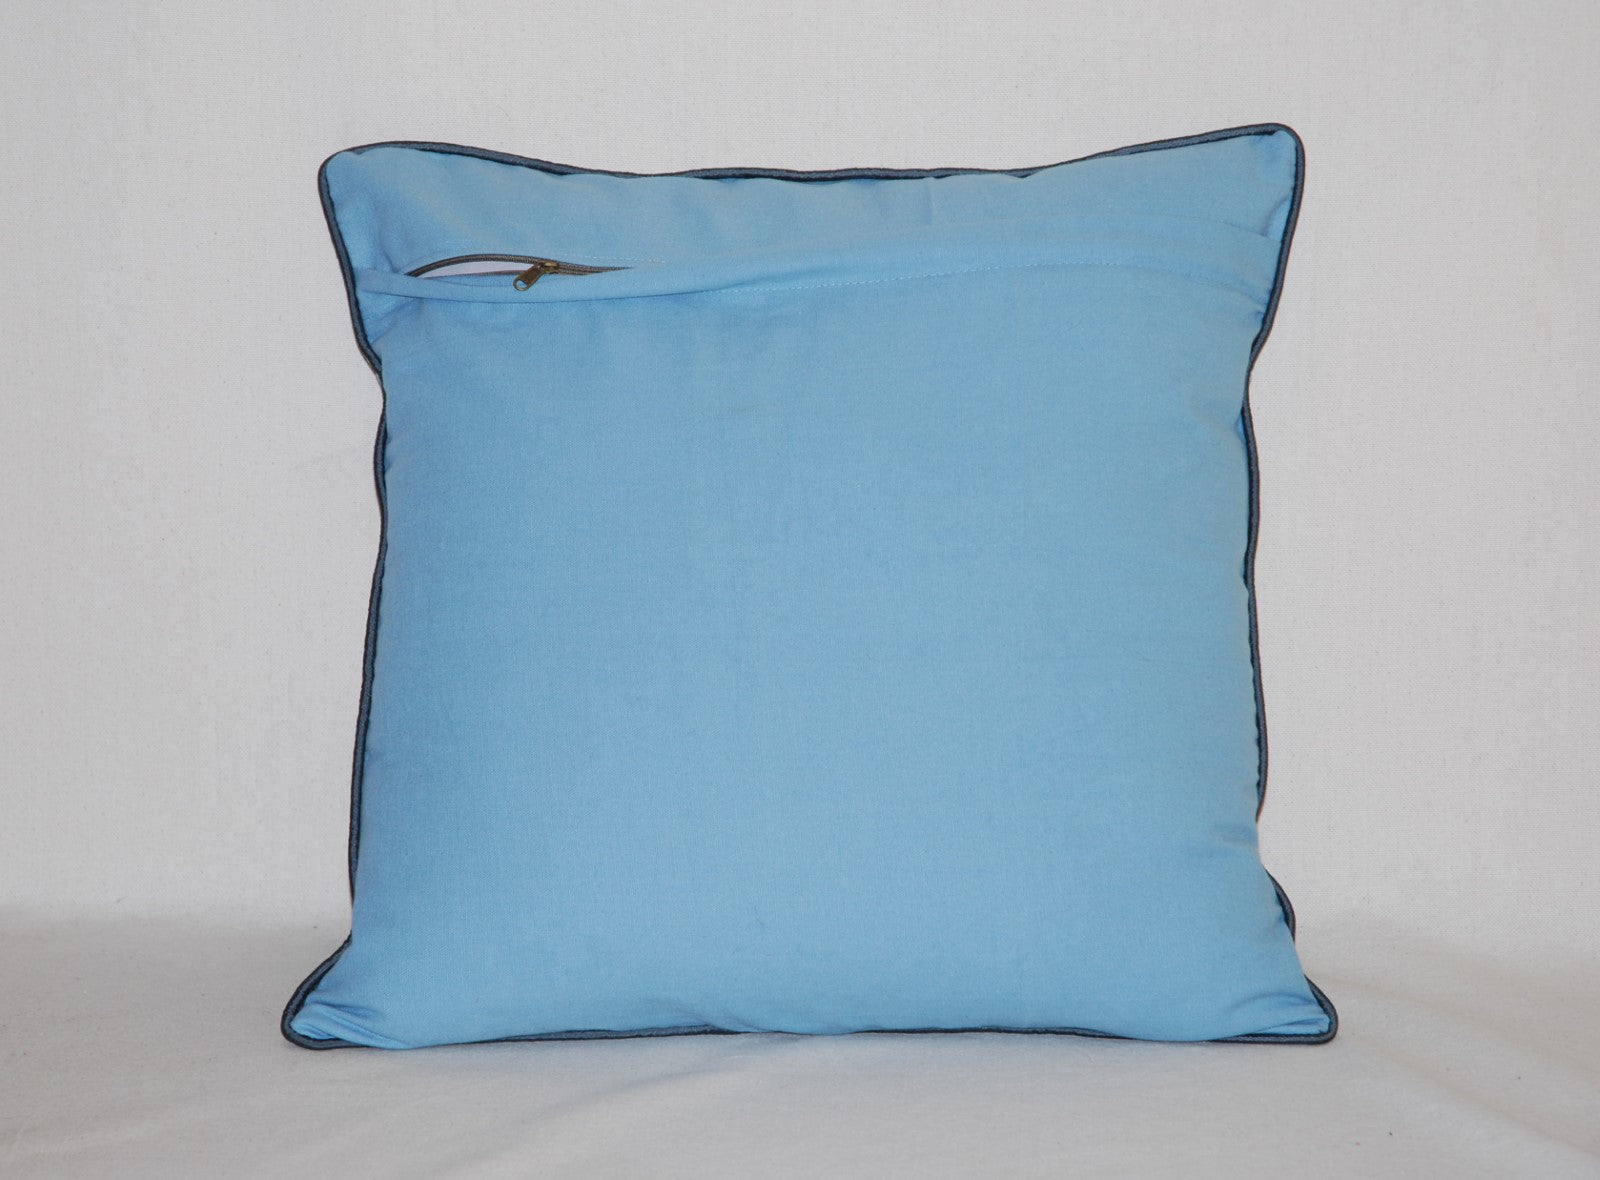 Crewel Wool on Cotton Throw Pillow Cushion Cover, Sky Blue Tone-Tone Embroidery  #CW260